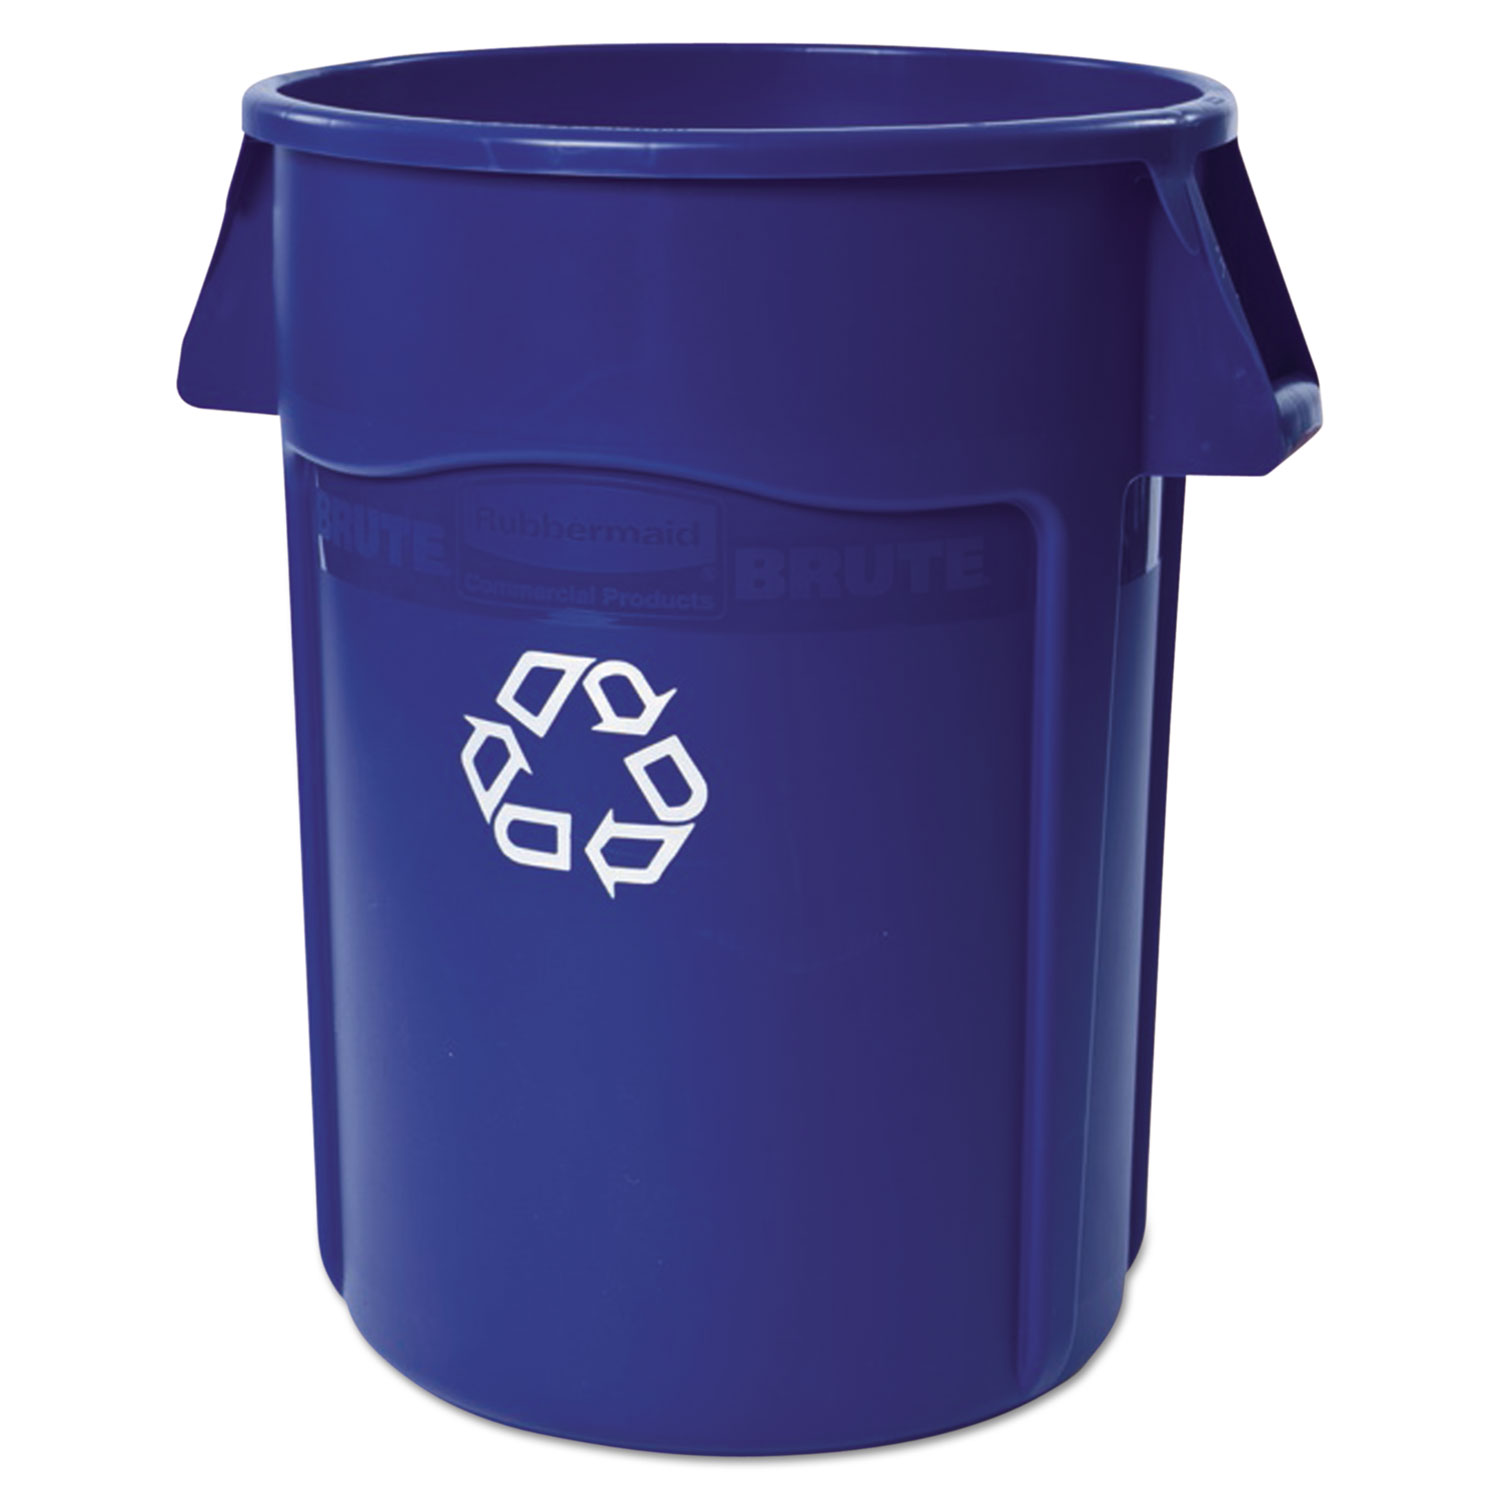  Rubbermaid Commercial FG264307BLUE Brute Recycling Container, Round, 44 gal, Blue (RCP264307BLU) 